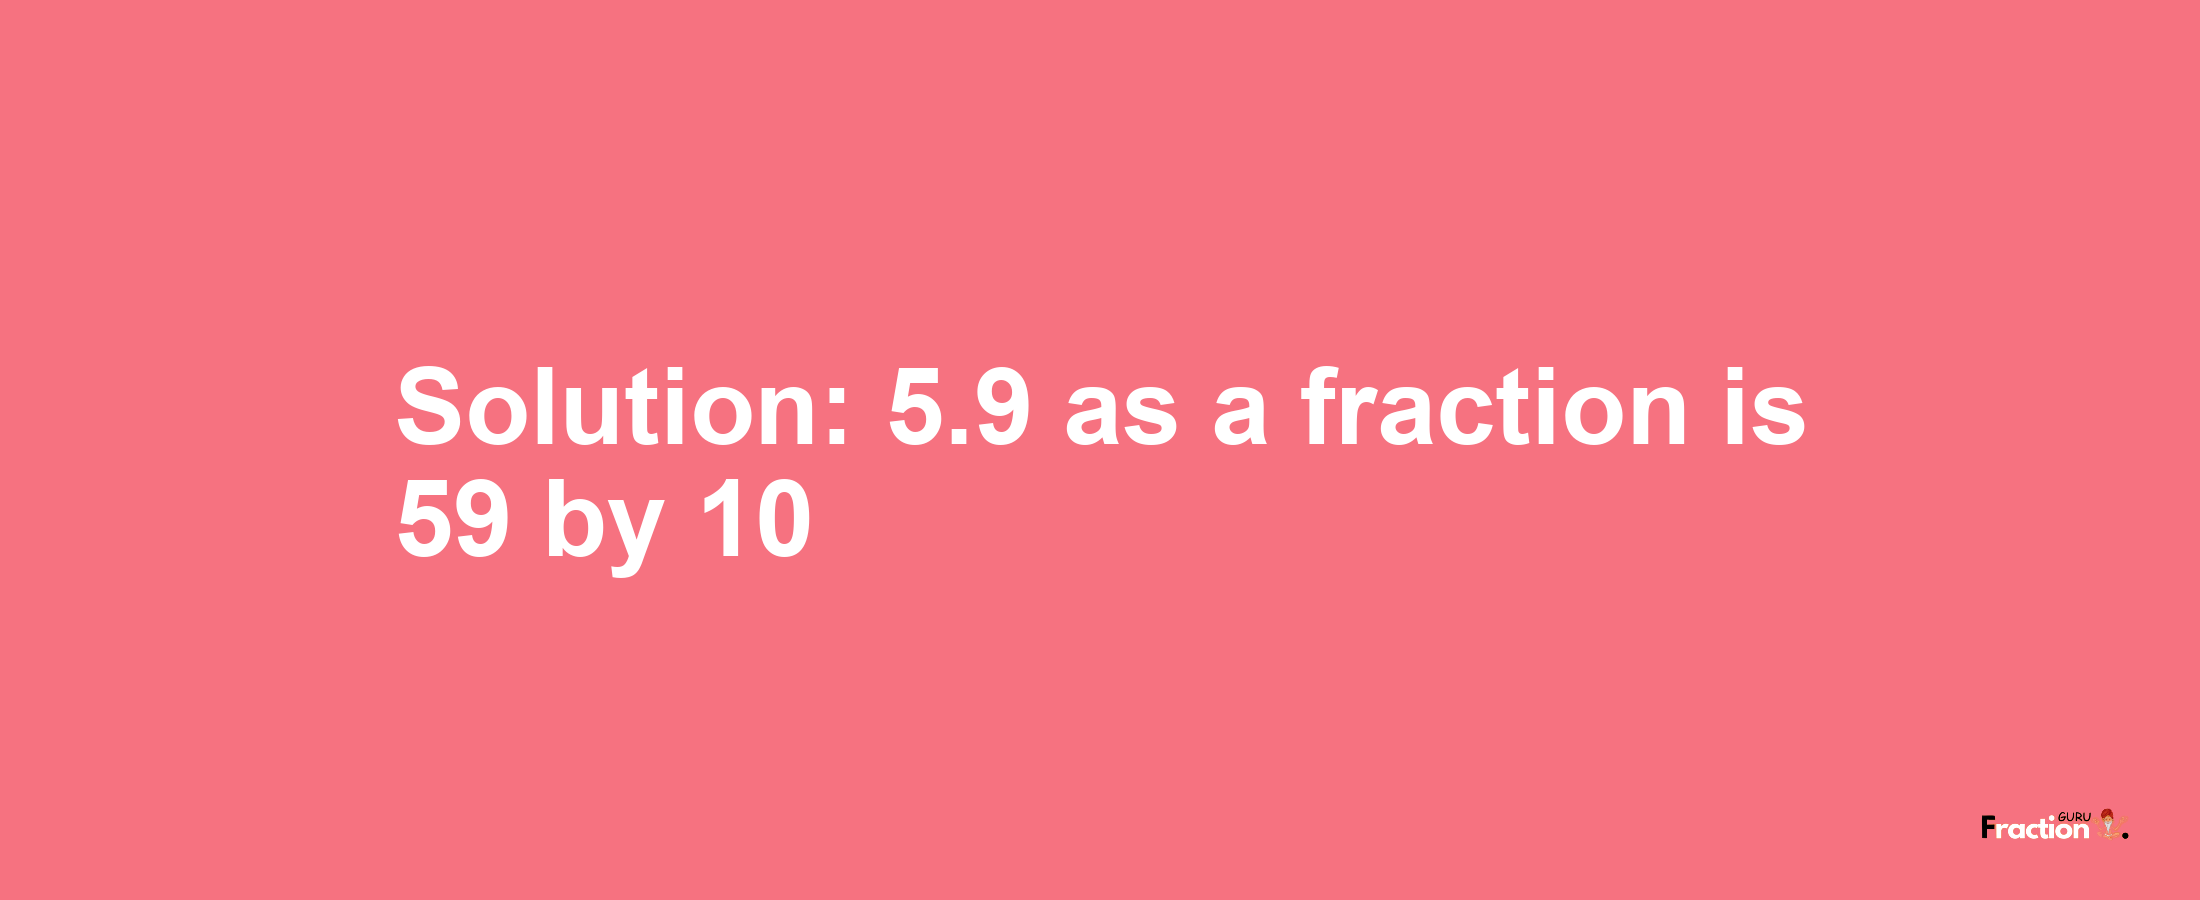 Solution:5.9 as a fraction is 59/10